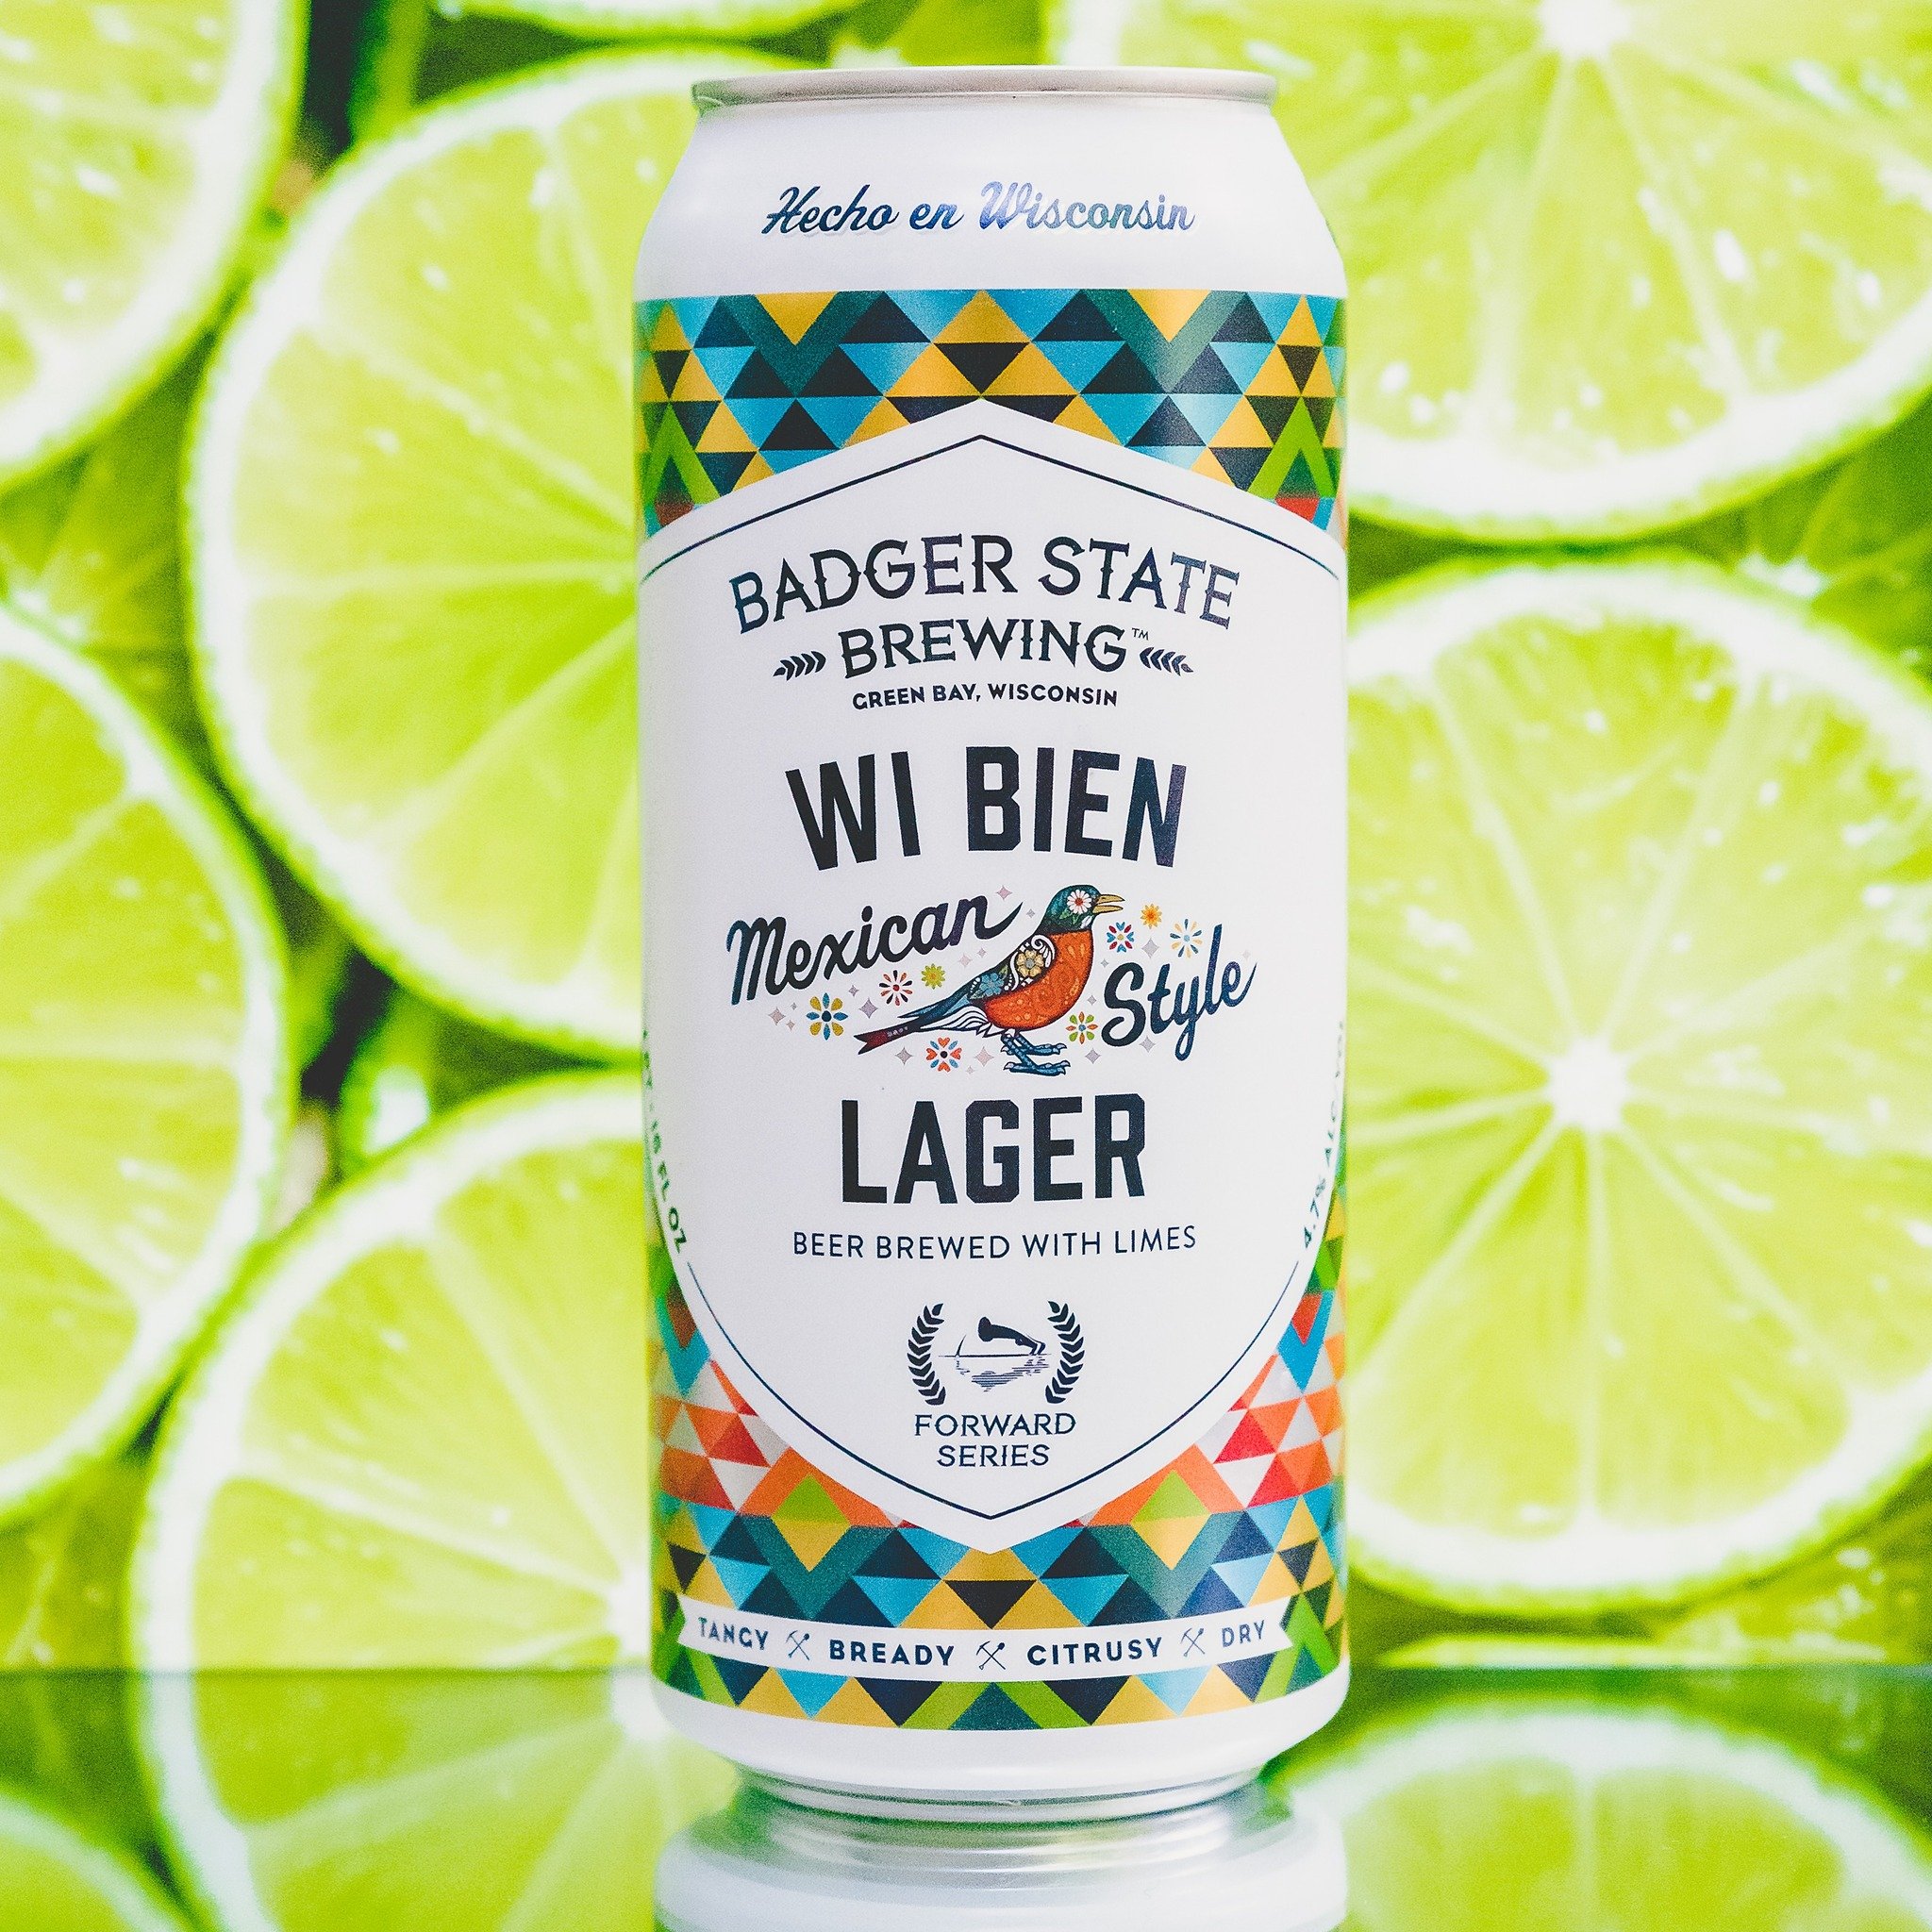 Hecho en Wisconsin since 2018! Back in the lineup for the season is Wi Bien.  A Mexican-style lager with a touch of lime and sea salt. When the Robin returns, it&rsquo;s time for Wi Bien. *BYO tequila&hellip;